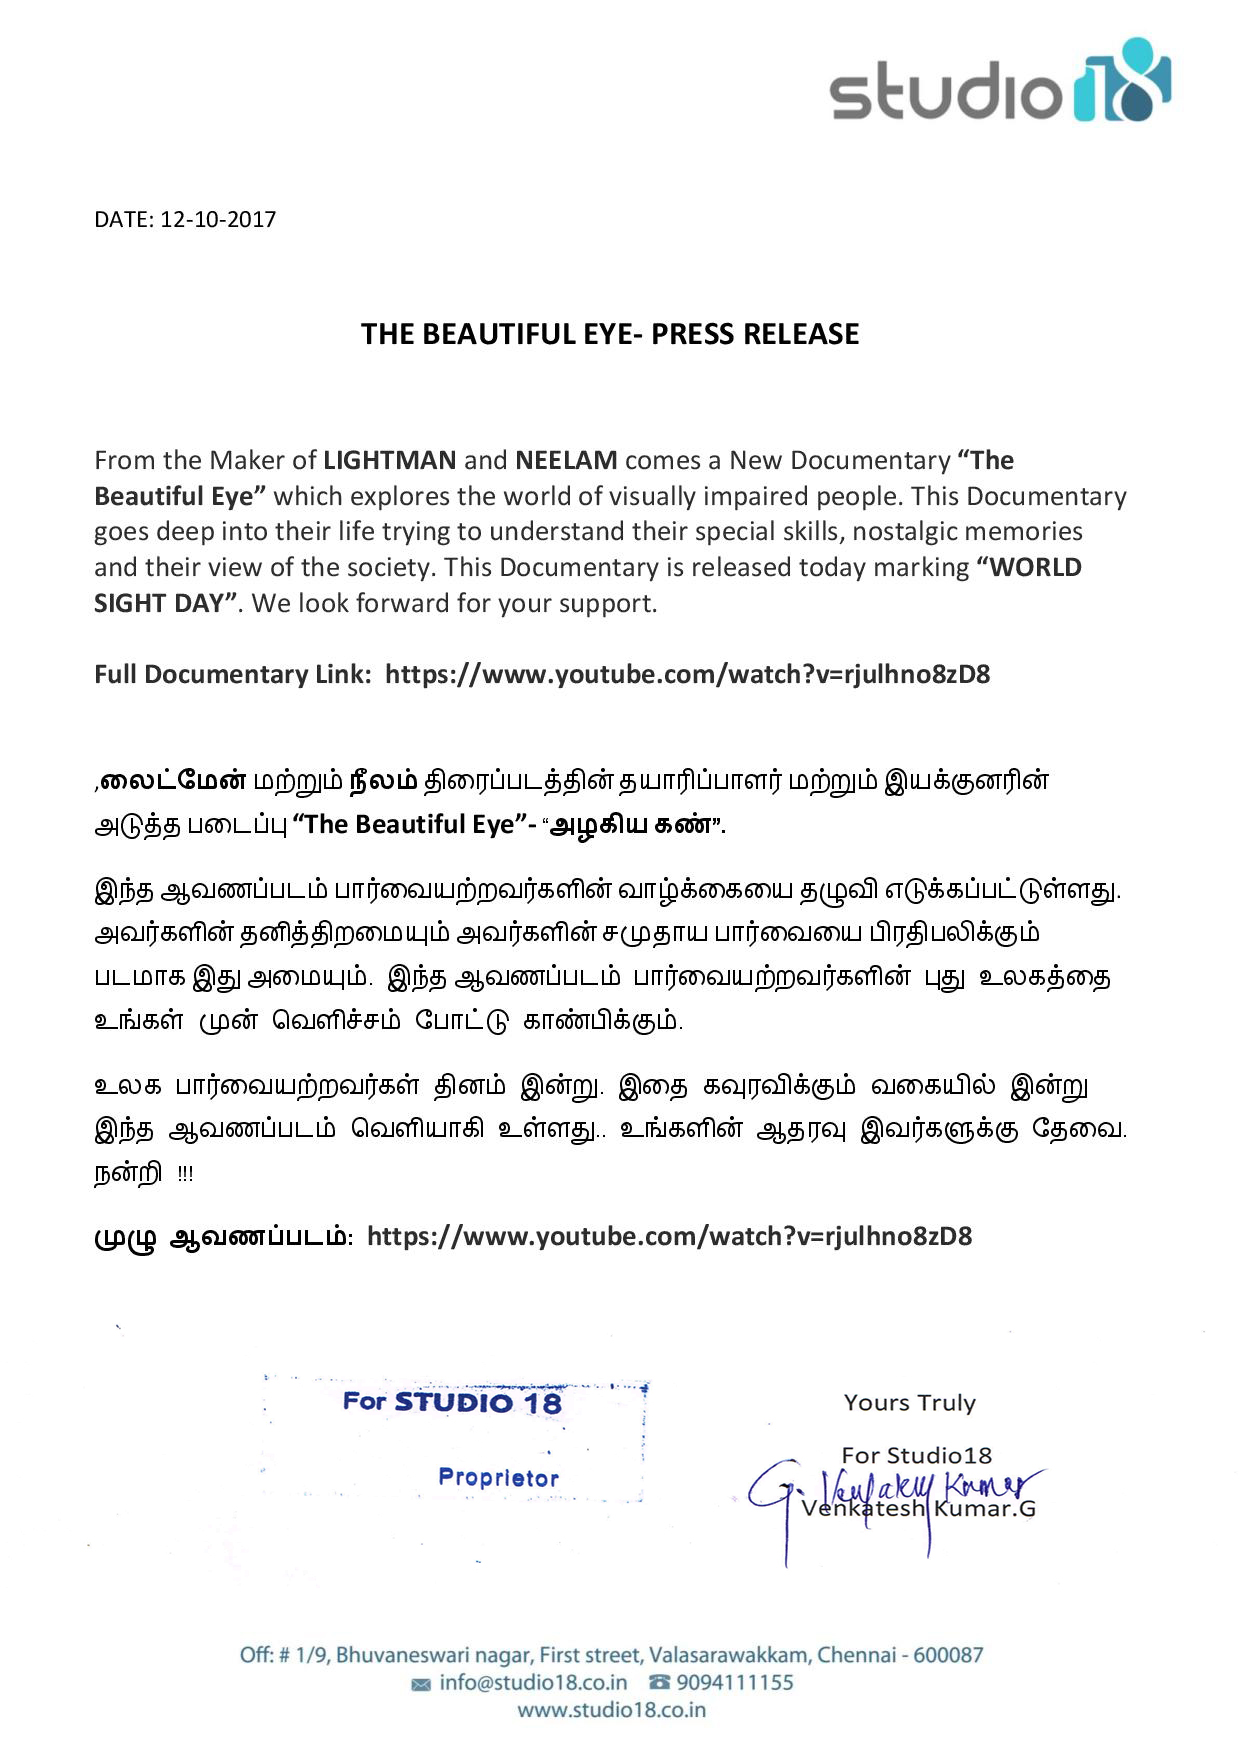 The Beautiful Eye Tamil Documentary - The World of Blindness Released Today On World Sight Day - Press Release (1)